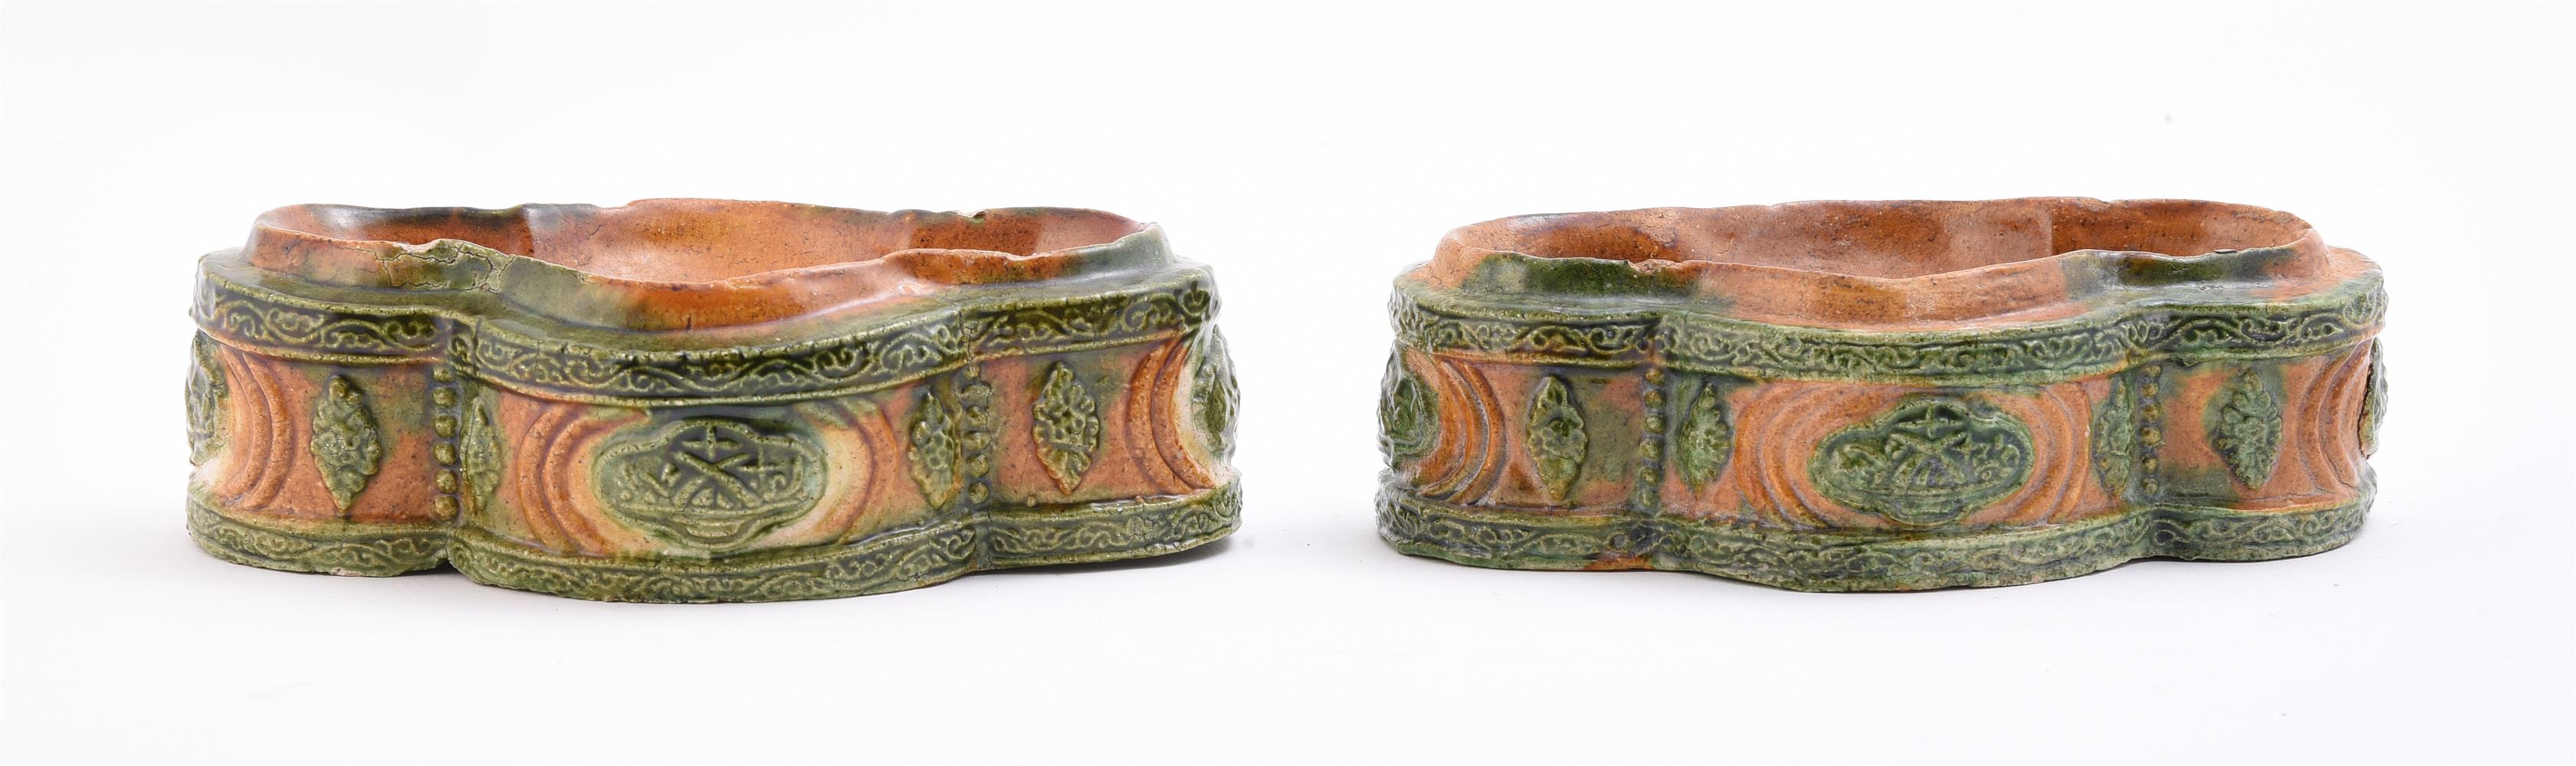 A SET OF TWO SANCAI-GLAZED STACKING QUATRE-LOBED DISHES - Image 2 of 5